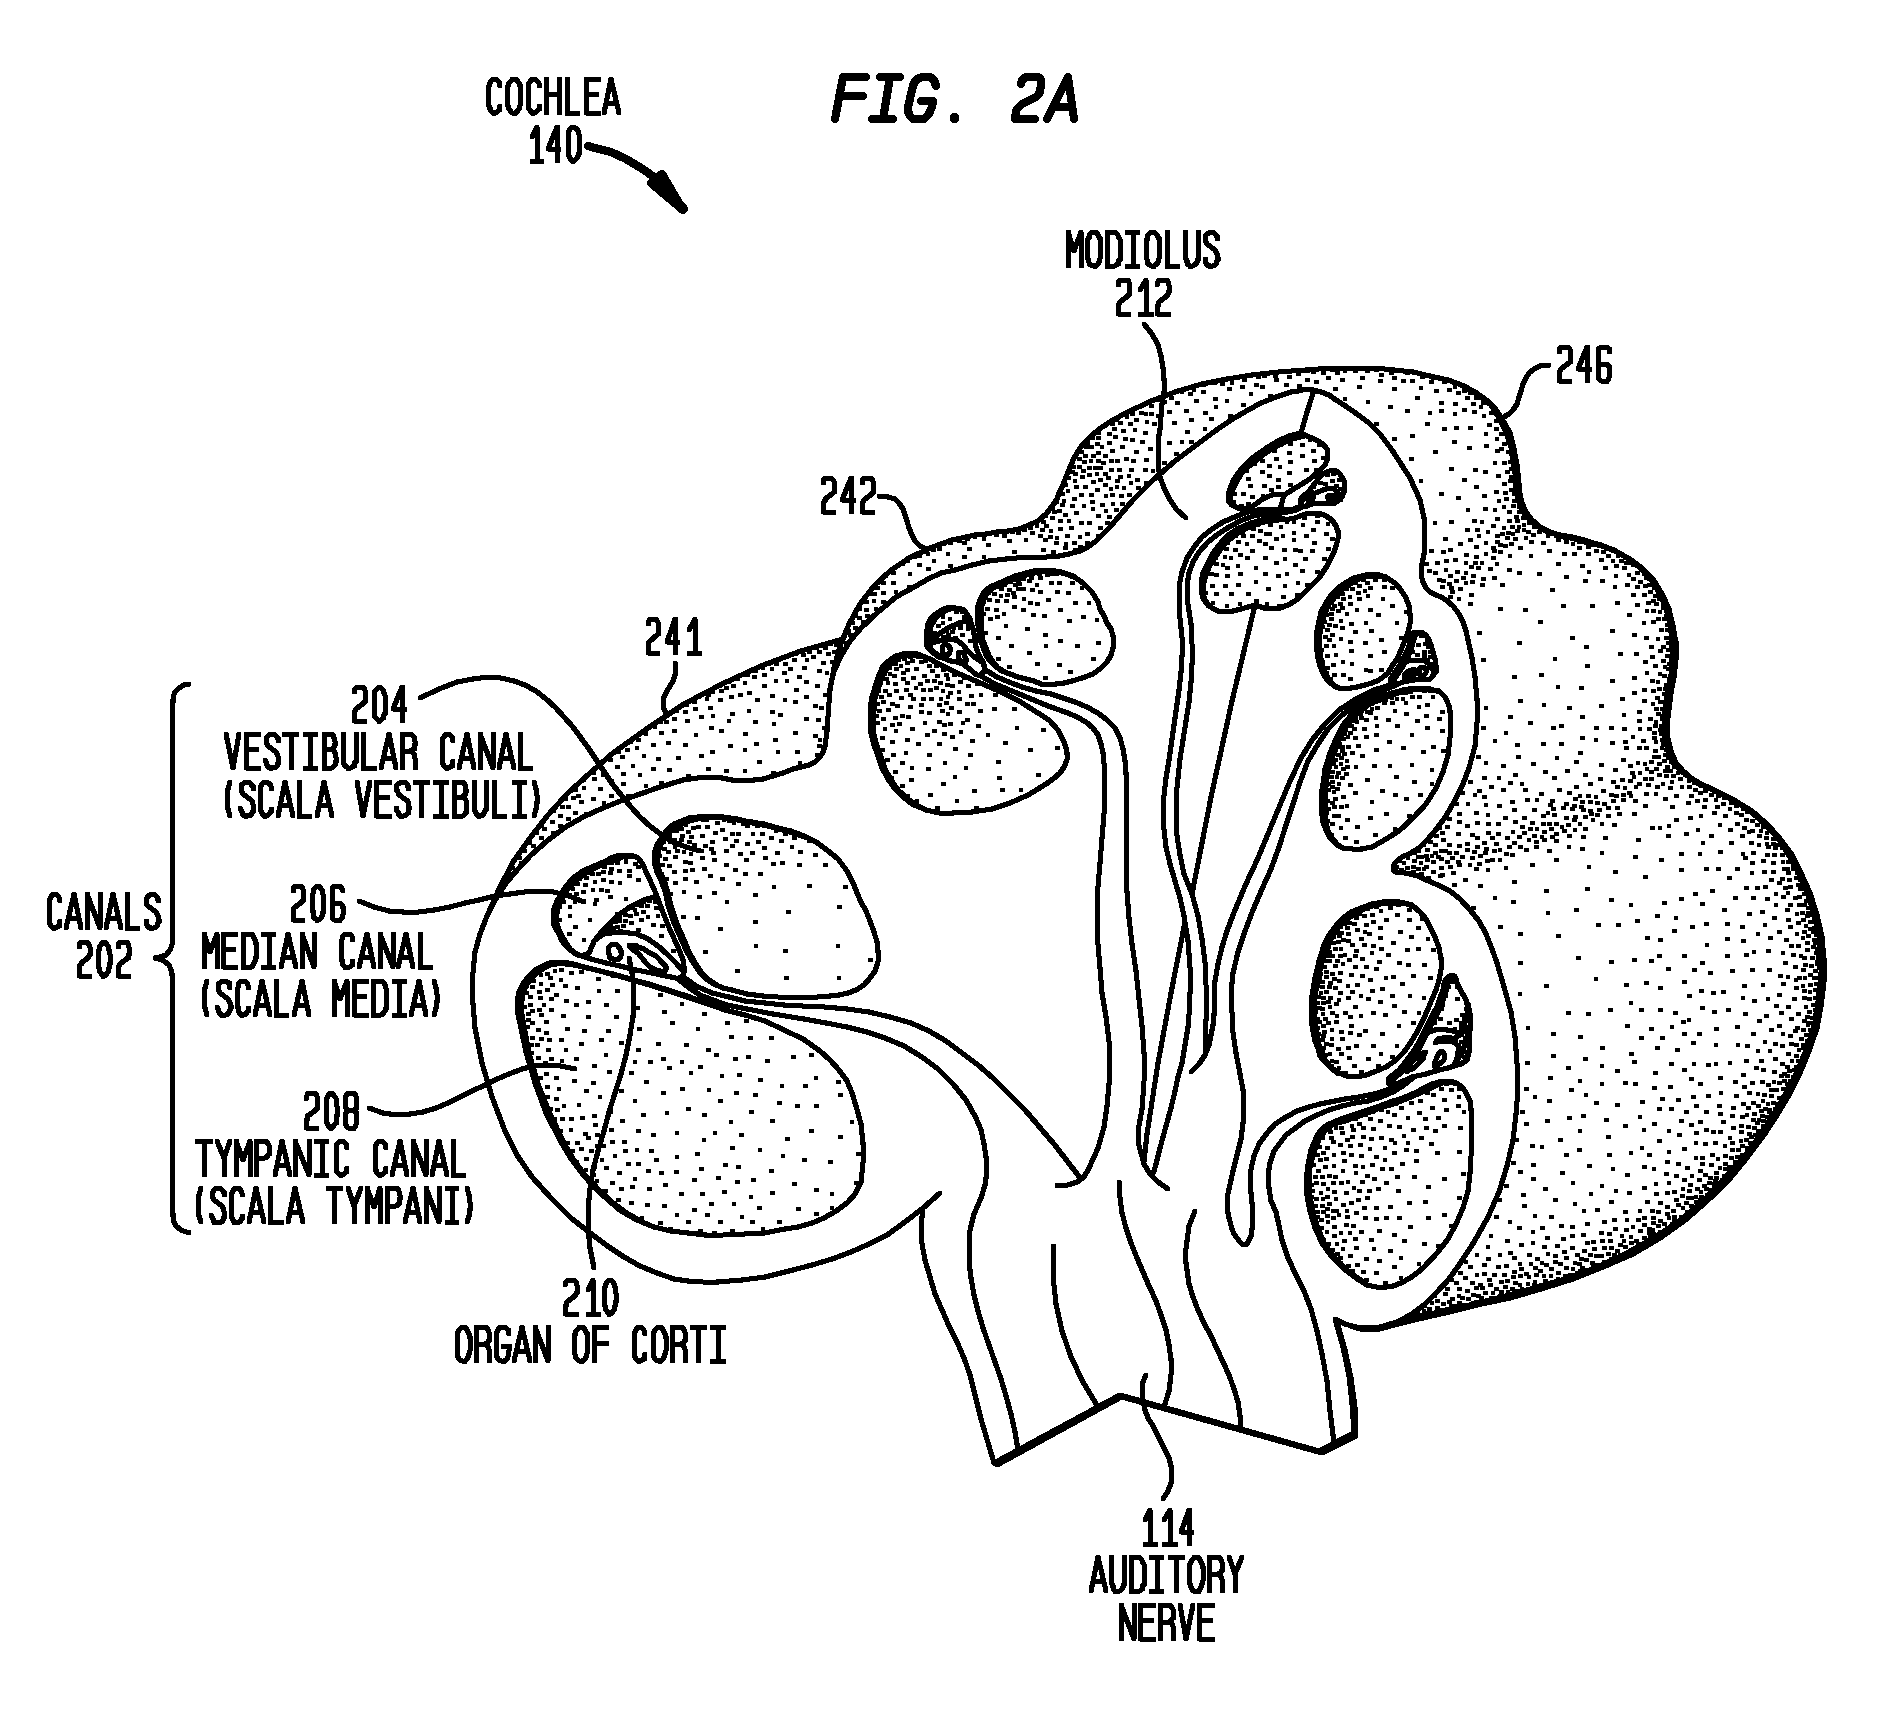 Neural-stimulating device for generating pseudospontaneous neural activity